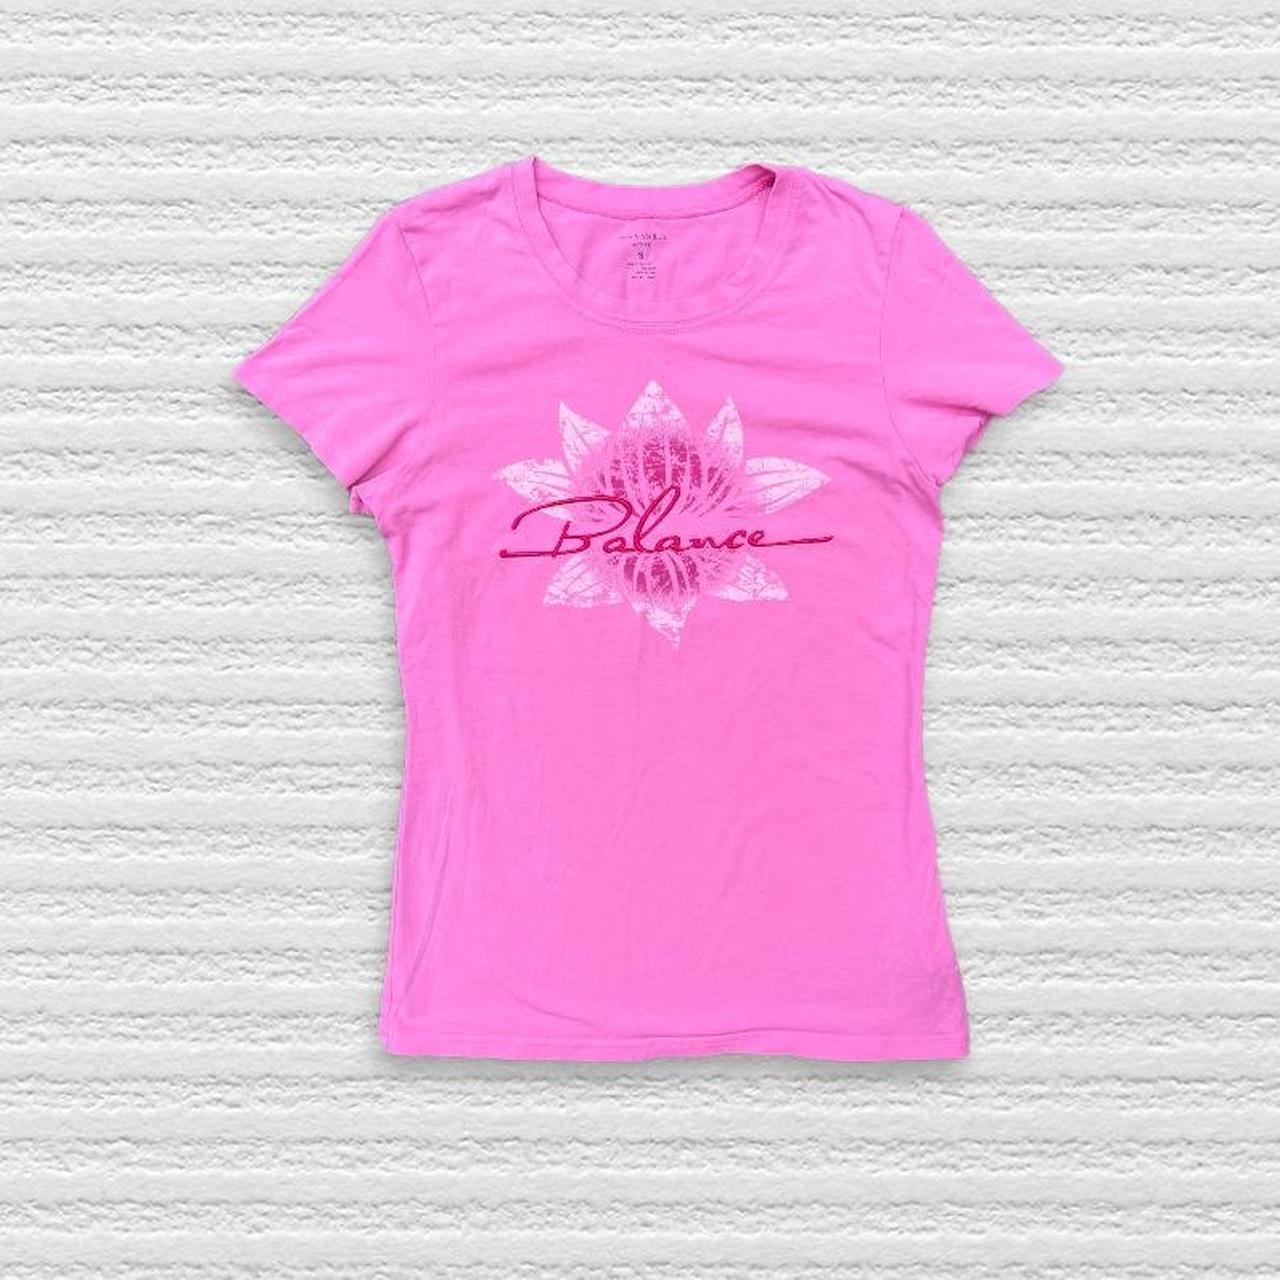 3LAB Women's Pink and White T-shirt